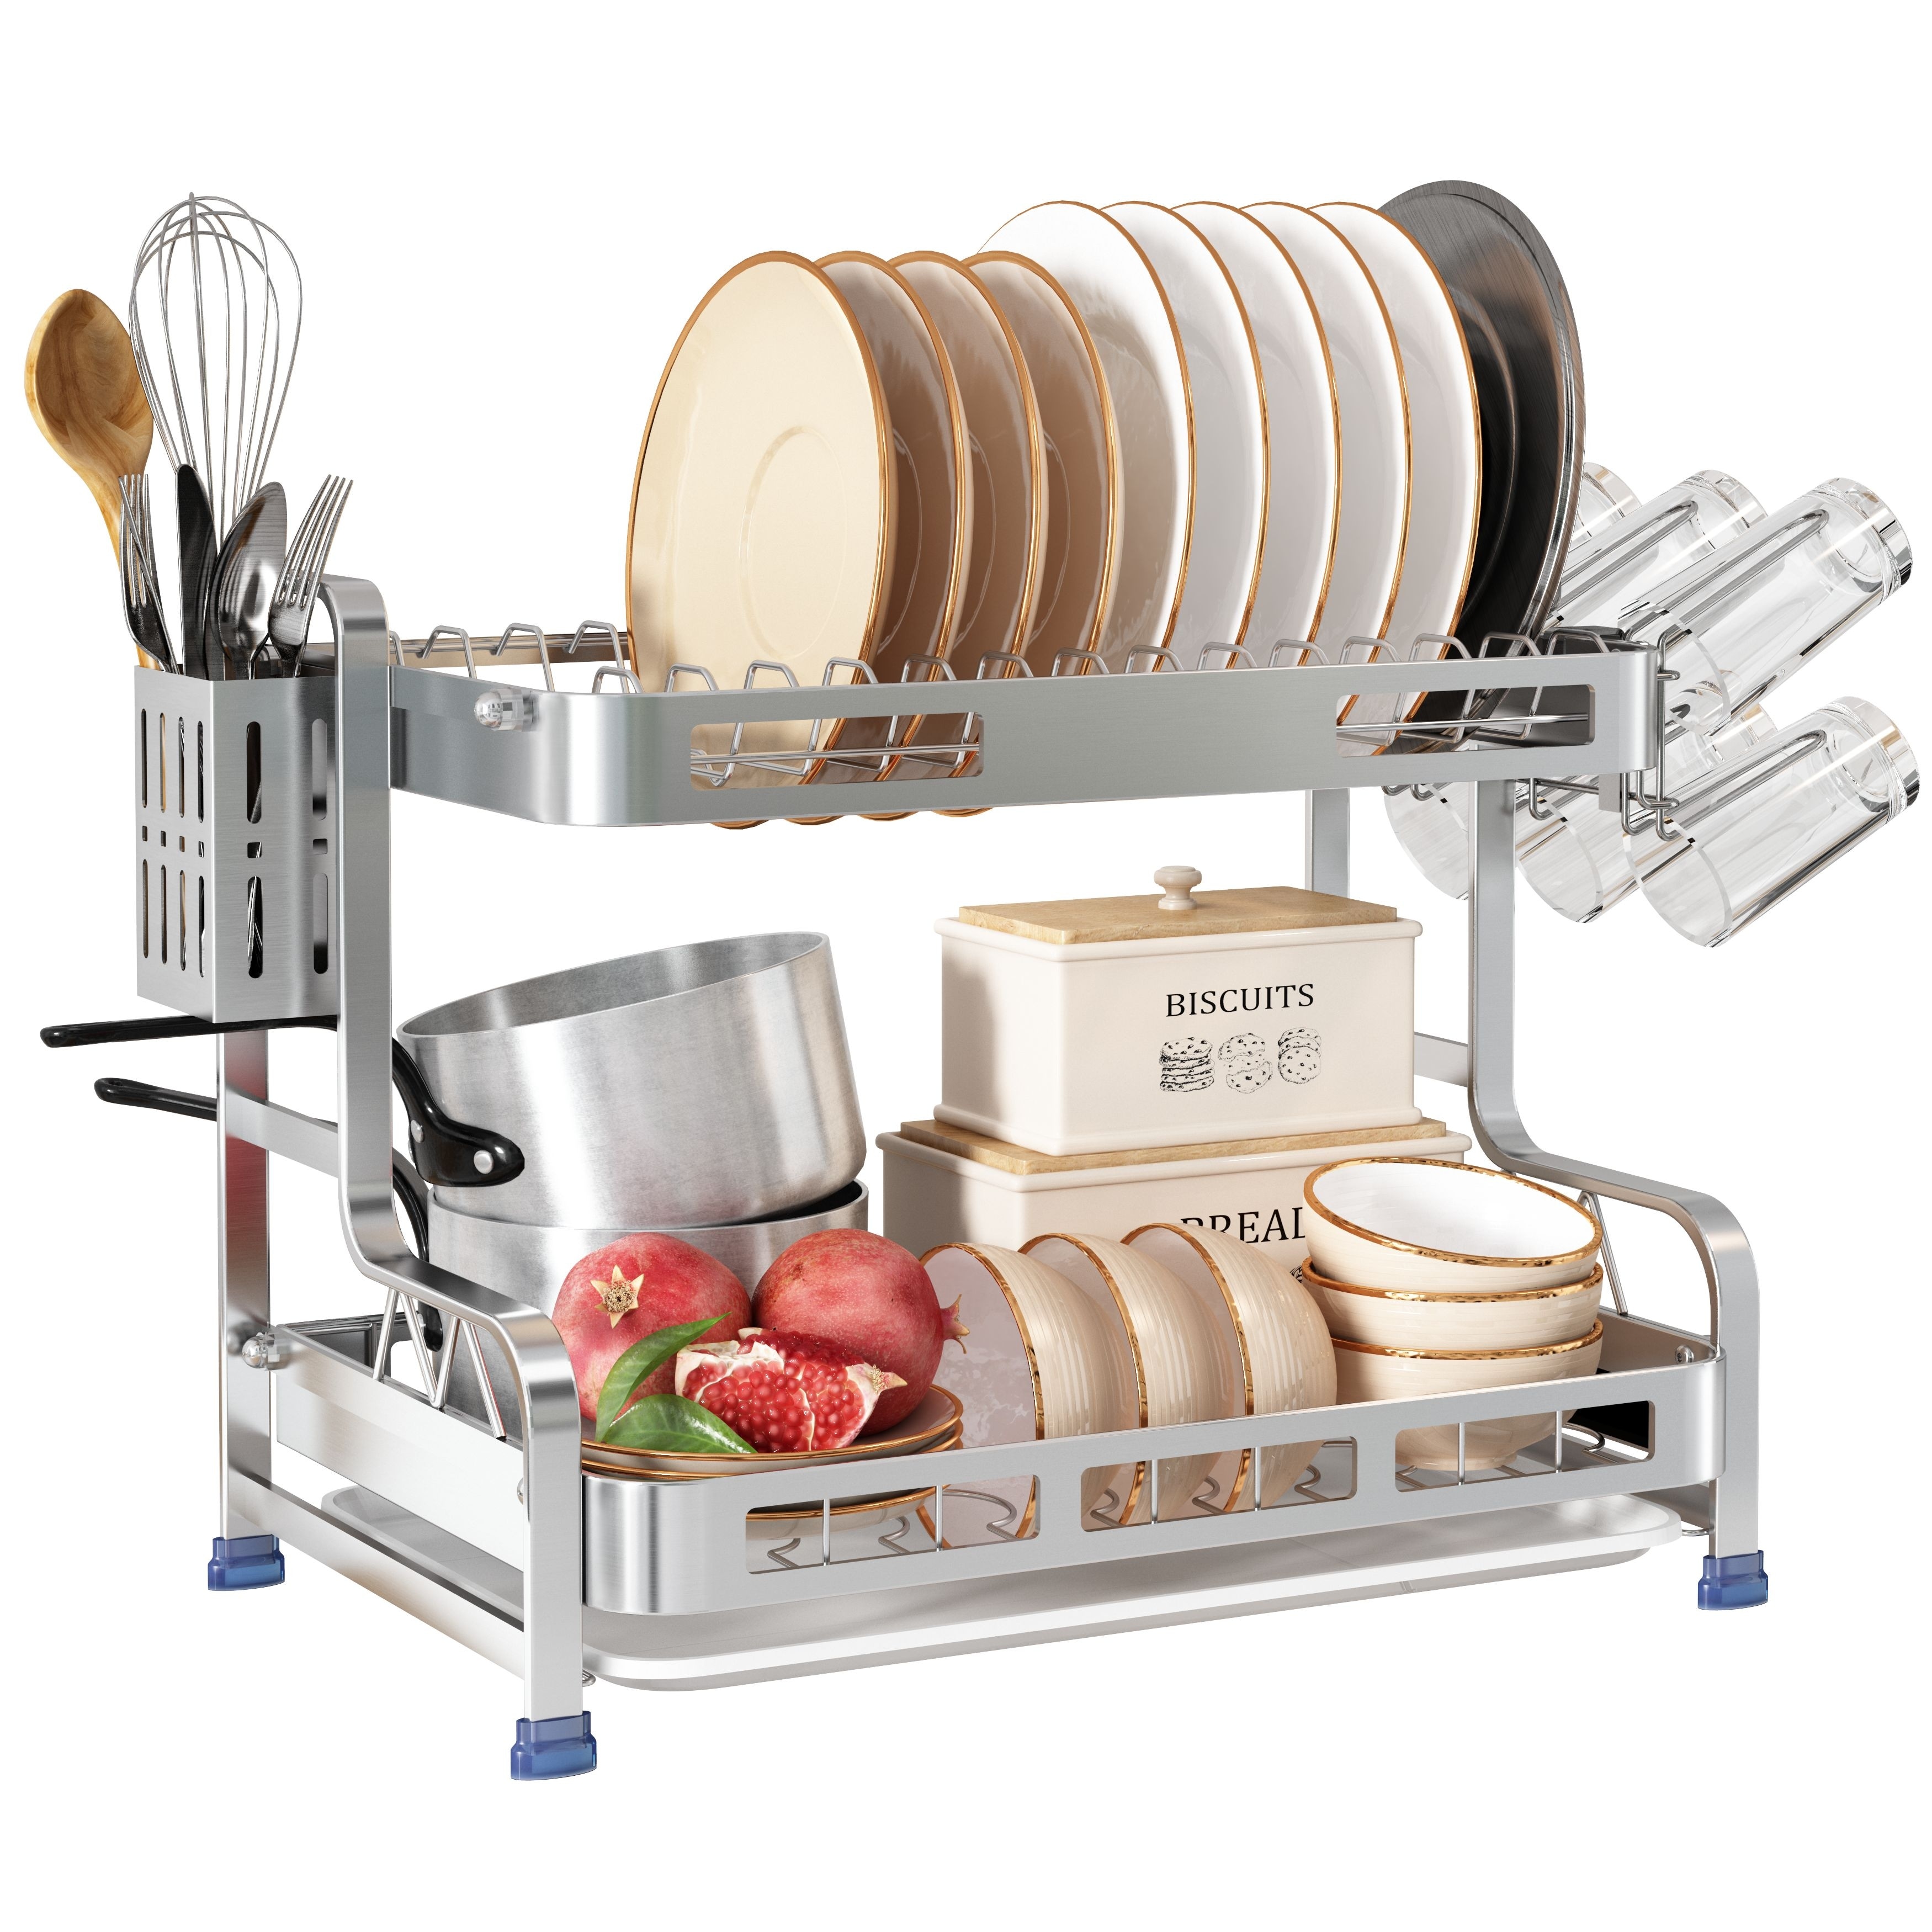 https://ak1.ostkcdn.com/images/products/is/images/direct/a3081c7bc2060499abb2261a96c512d96229b45f/2-Tier-Kitchen-Stainless-Steel-Dish-Rack-with-Cutlery-Holder.jpg